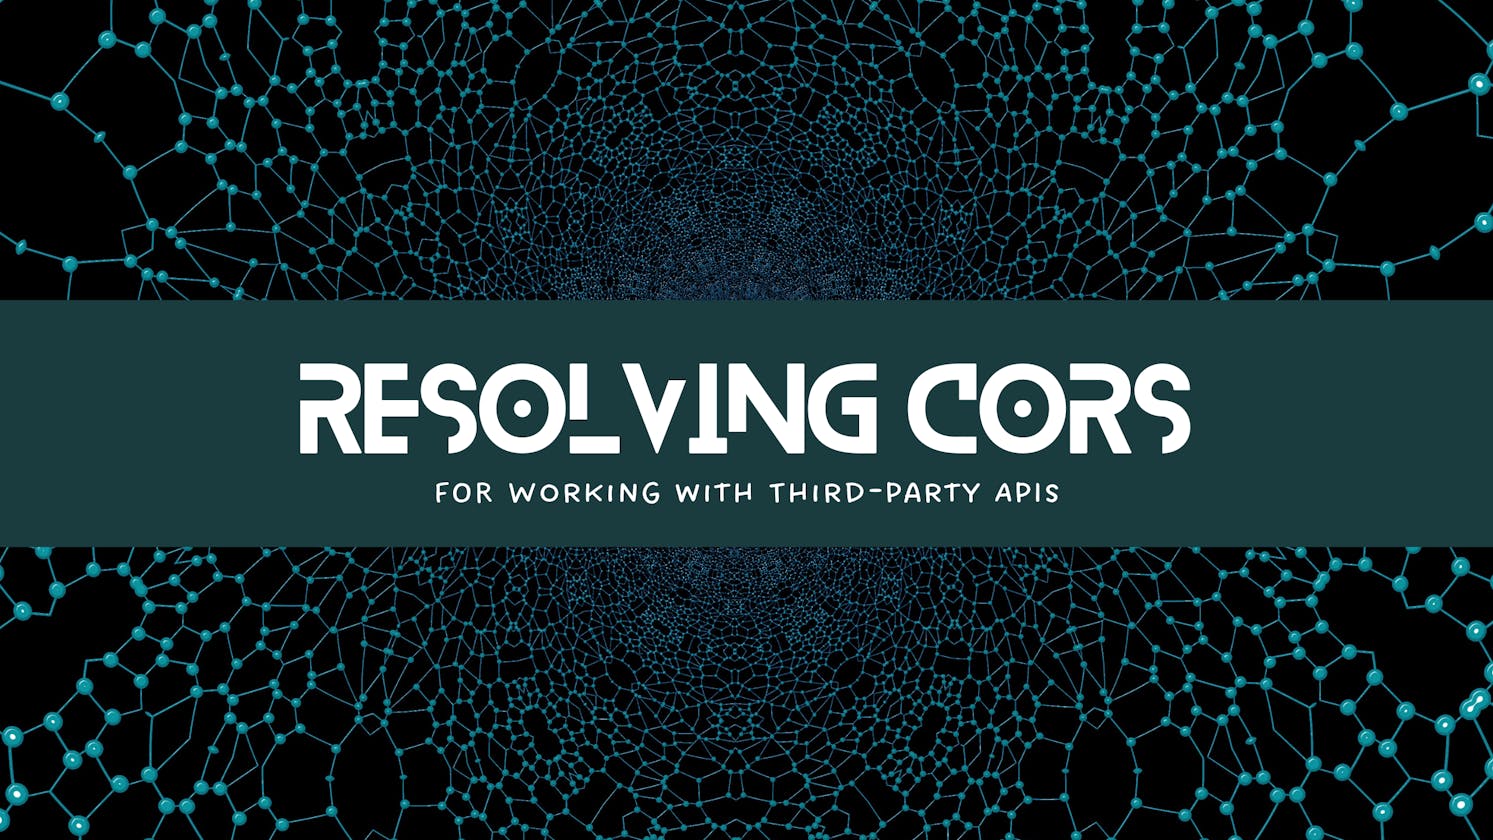 Resolving CORS Restriction using Node.js: A Guide for Working with Third-Party APIs